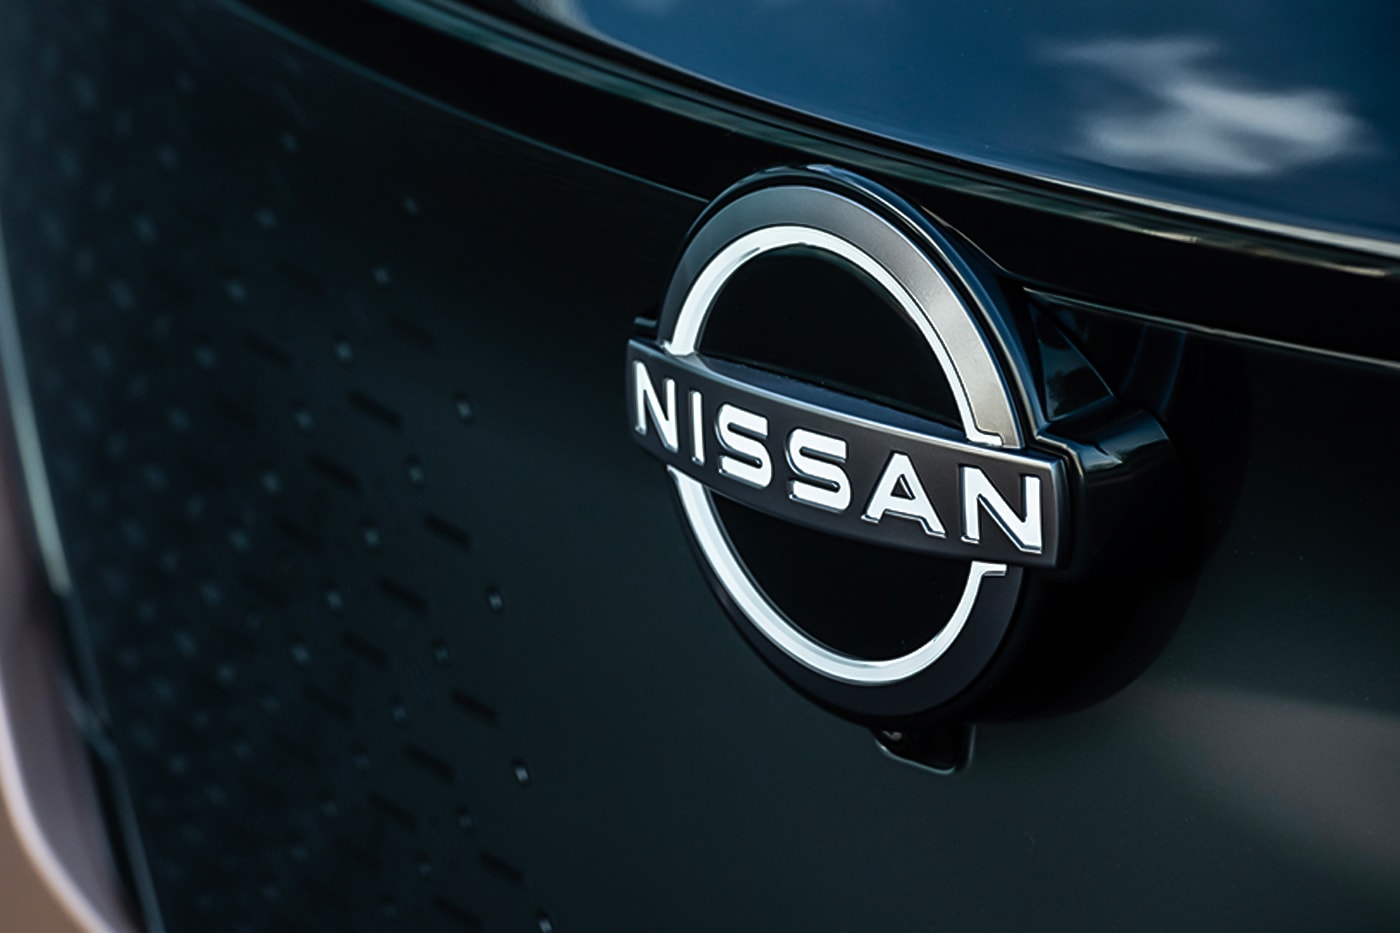 Nissan New 2020 Redesigned Logo Badge Unveil Info